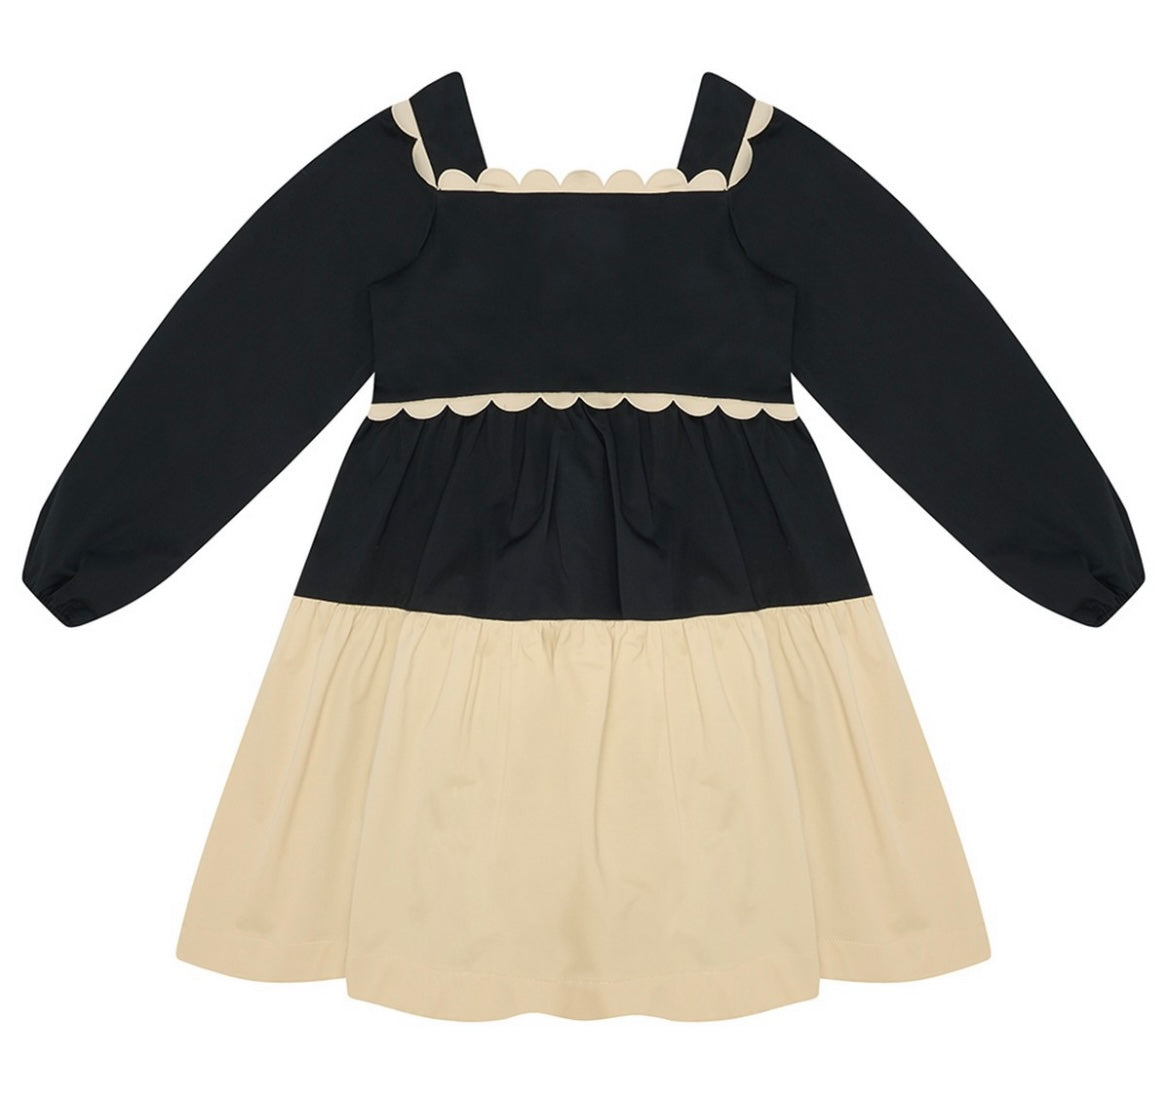 The Middle Daughter Black Queen Scallop Dress